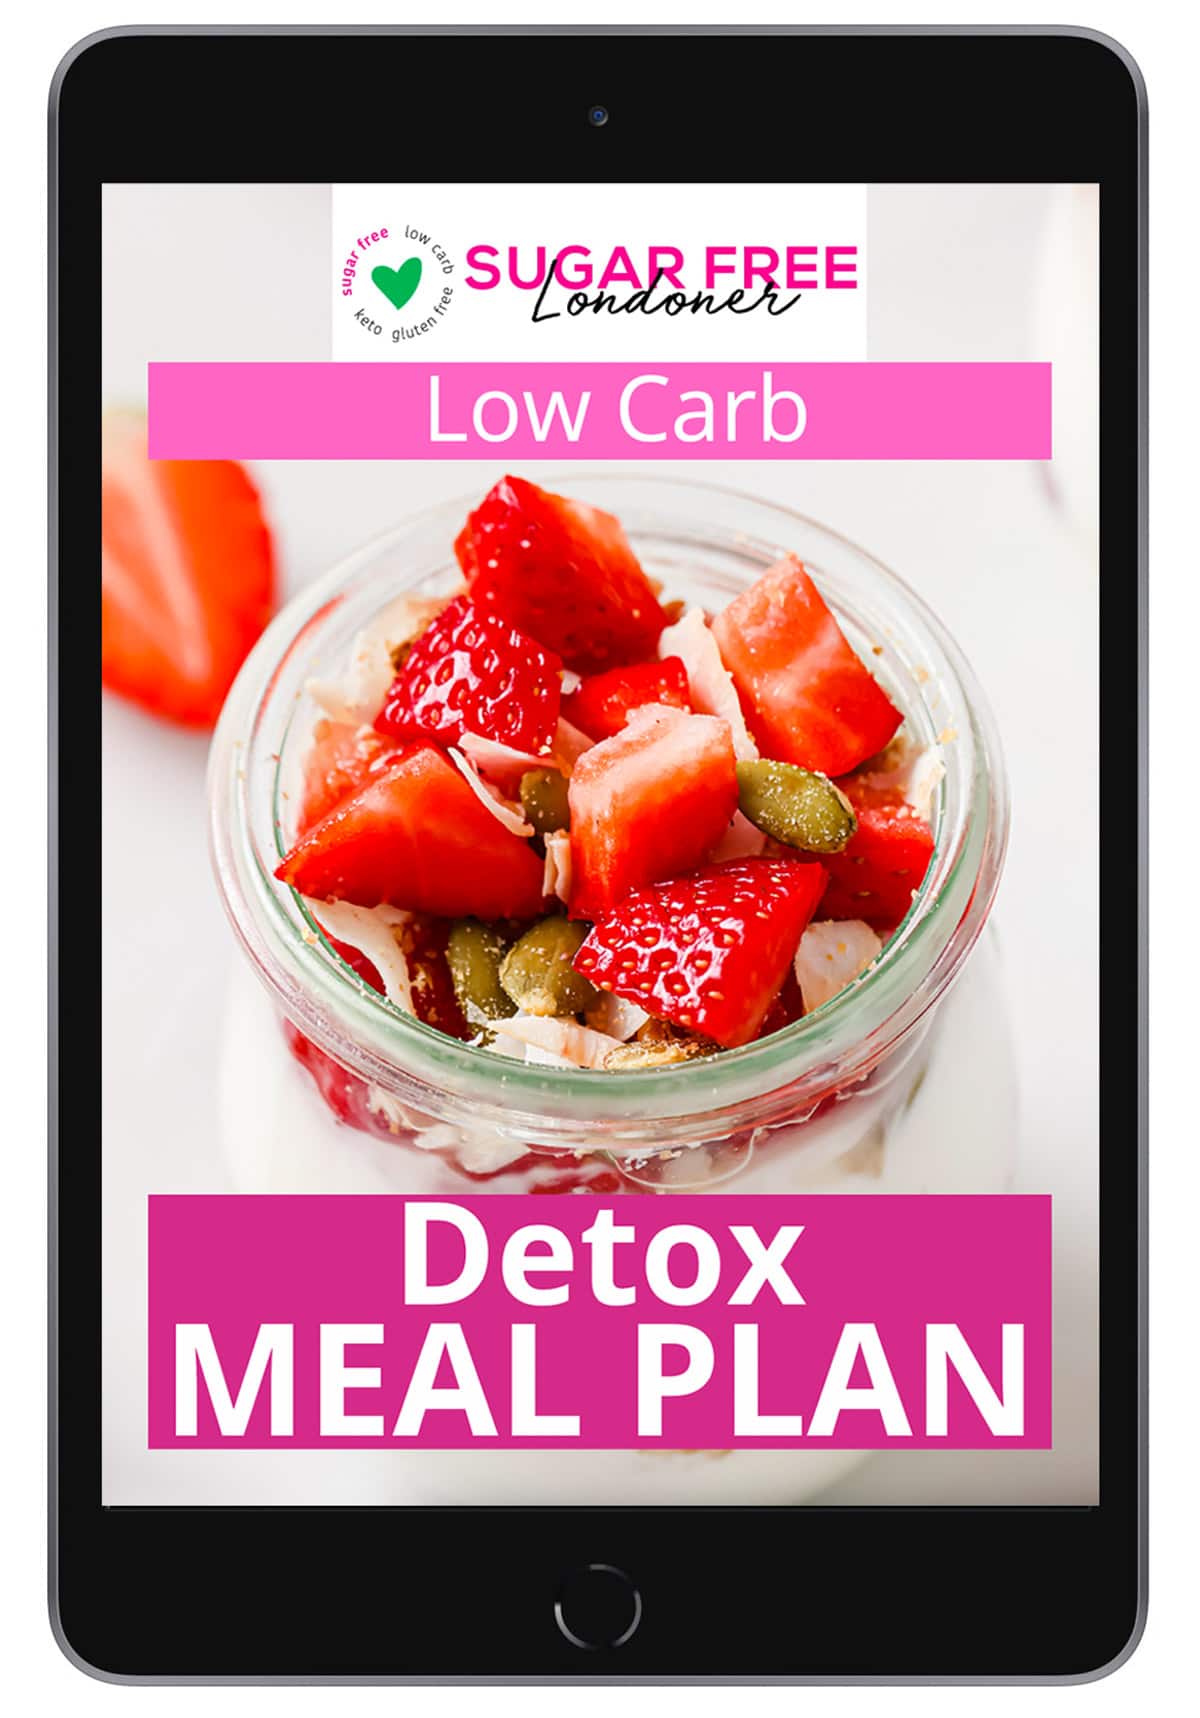 A mobile phone mockup with the title page of the detox meal plan.